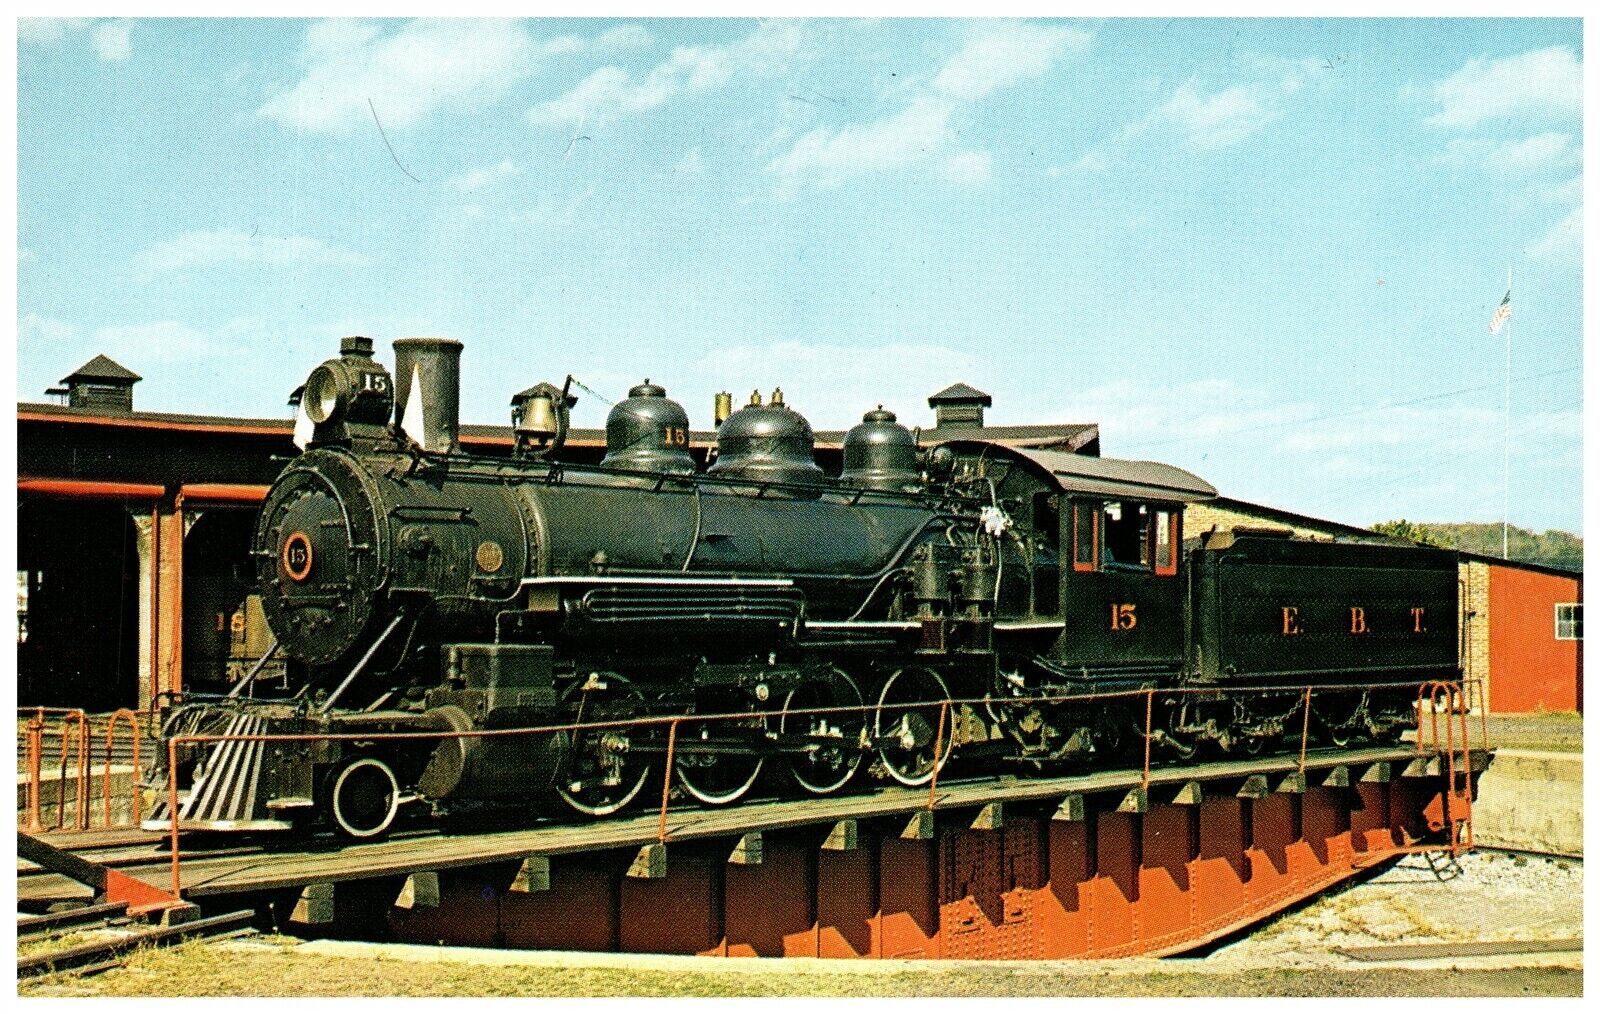 East Broad Top Railroad Engine 15 on Turntable at Roundhouse Rockhill Furnace PA